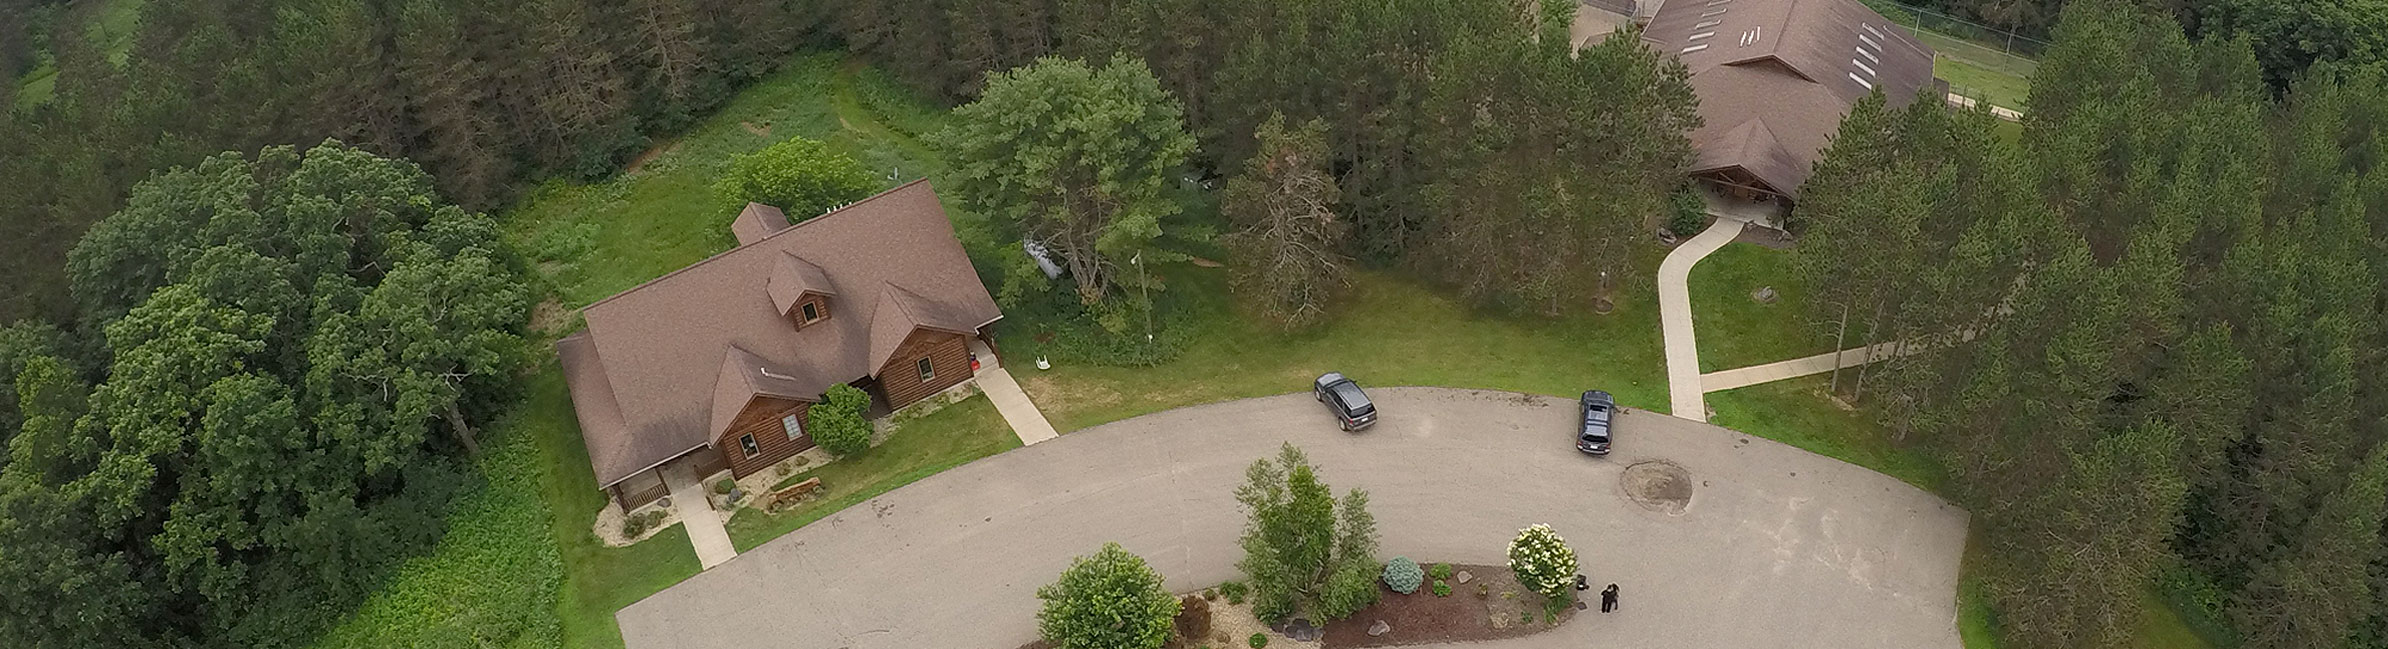 Arial view of the K-9 Country Lodge